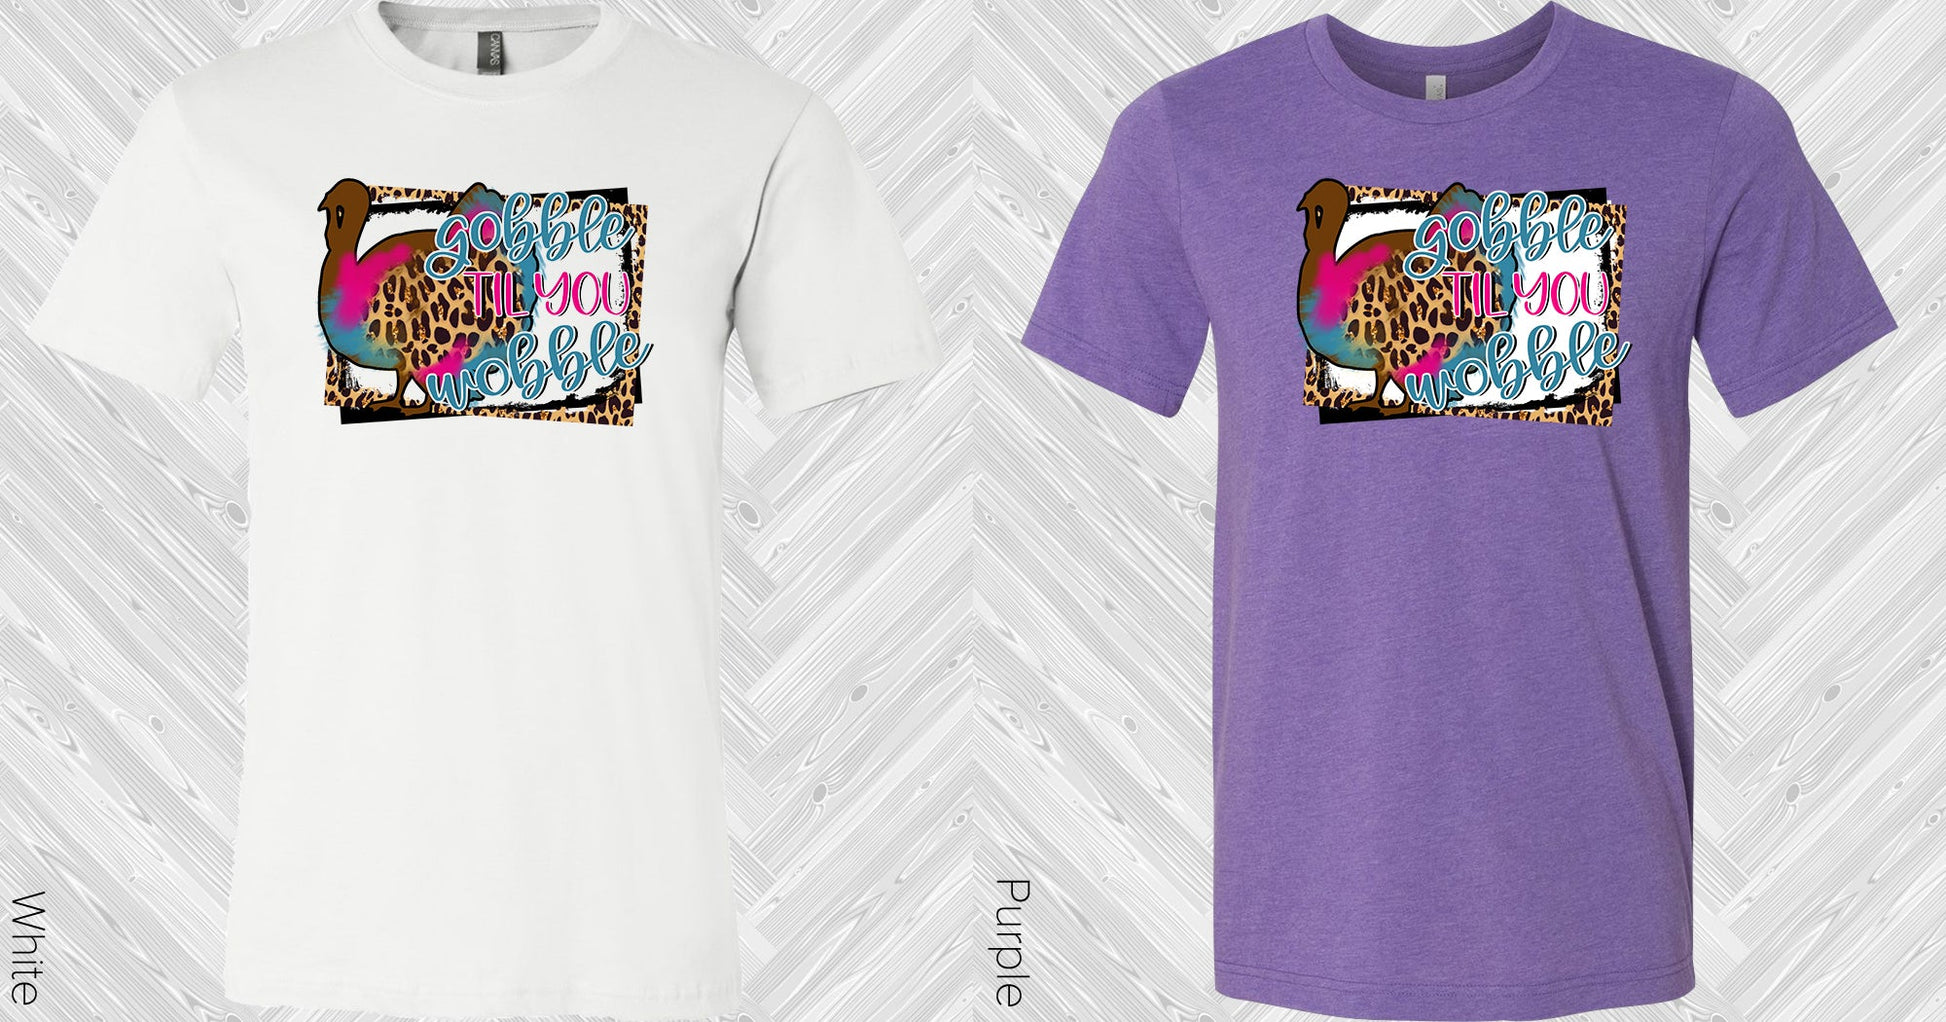 Gobble Til You Wobble Graphic Tee Graphic Tee